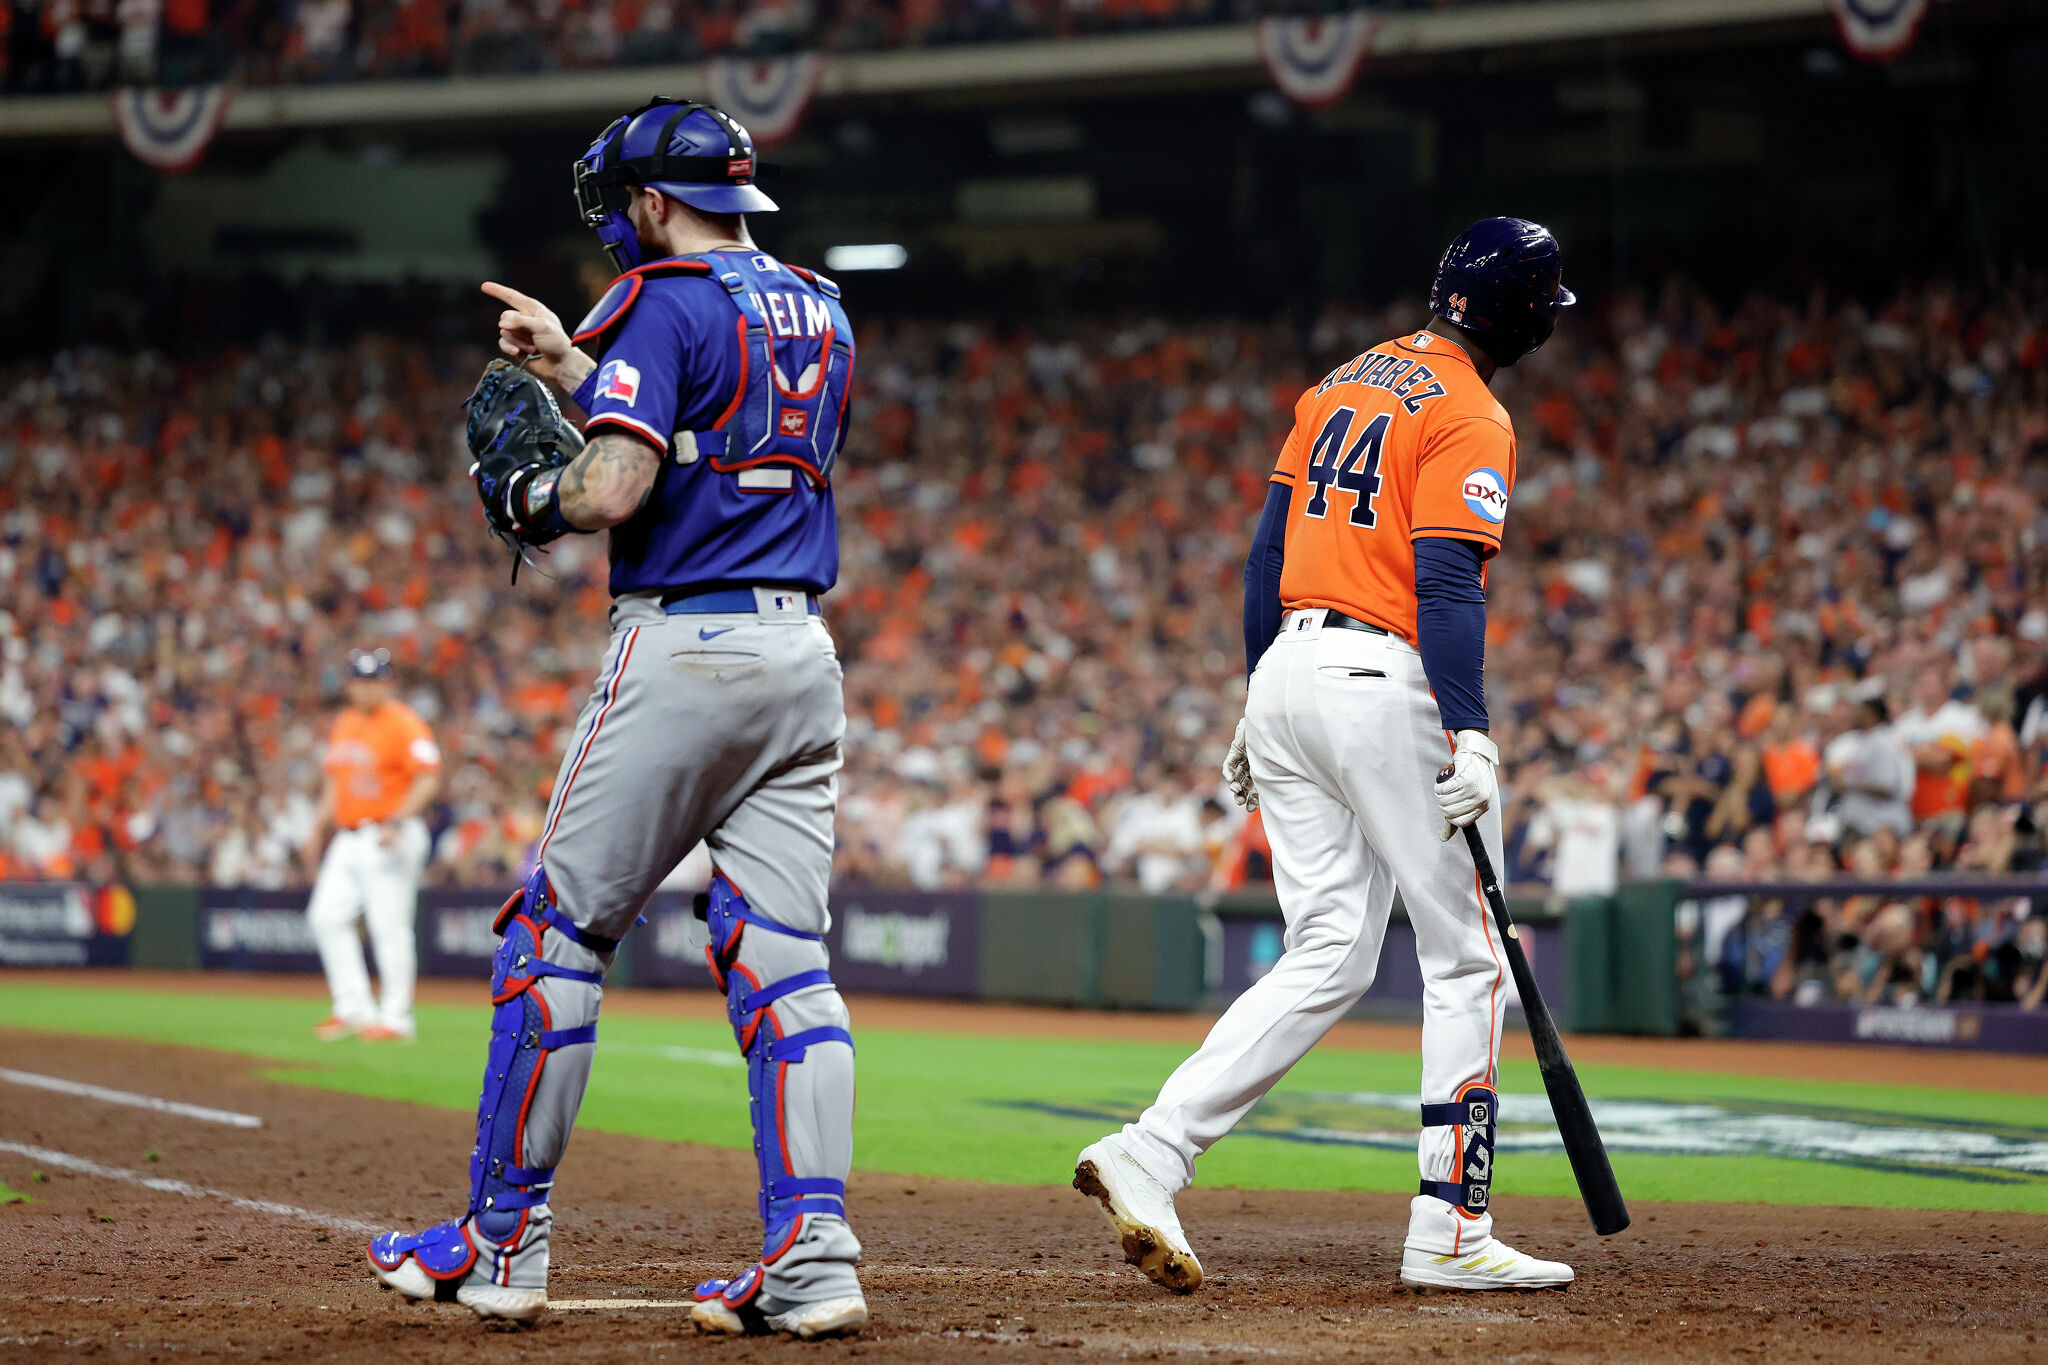 ALCS Game 6 highlights: Adolis Garcia hits grand slam, Rangers beat Astros  9-2, force Game 7